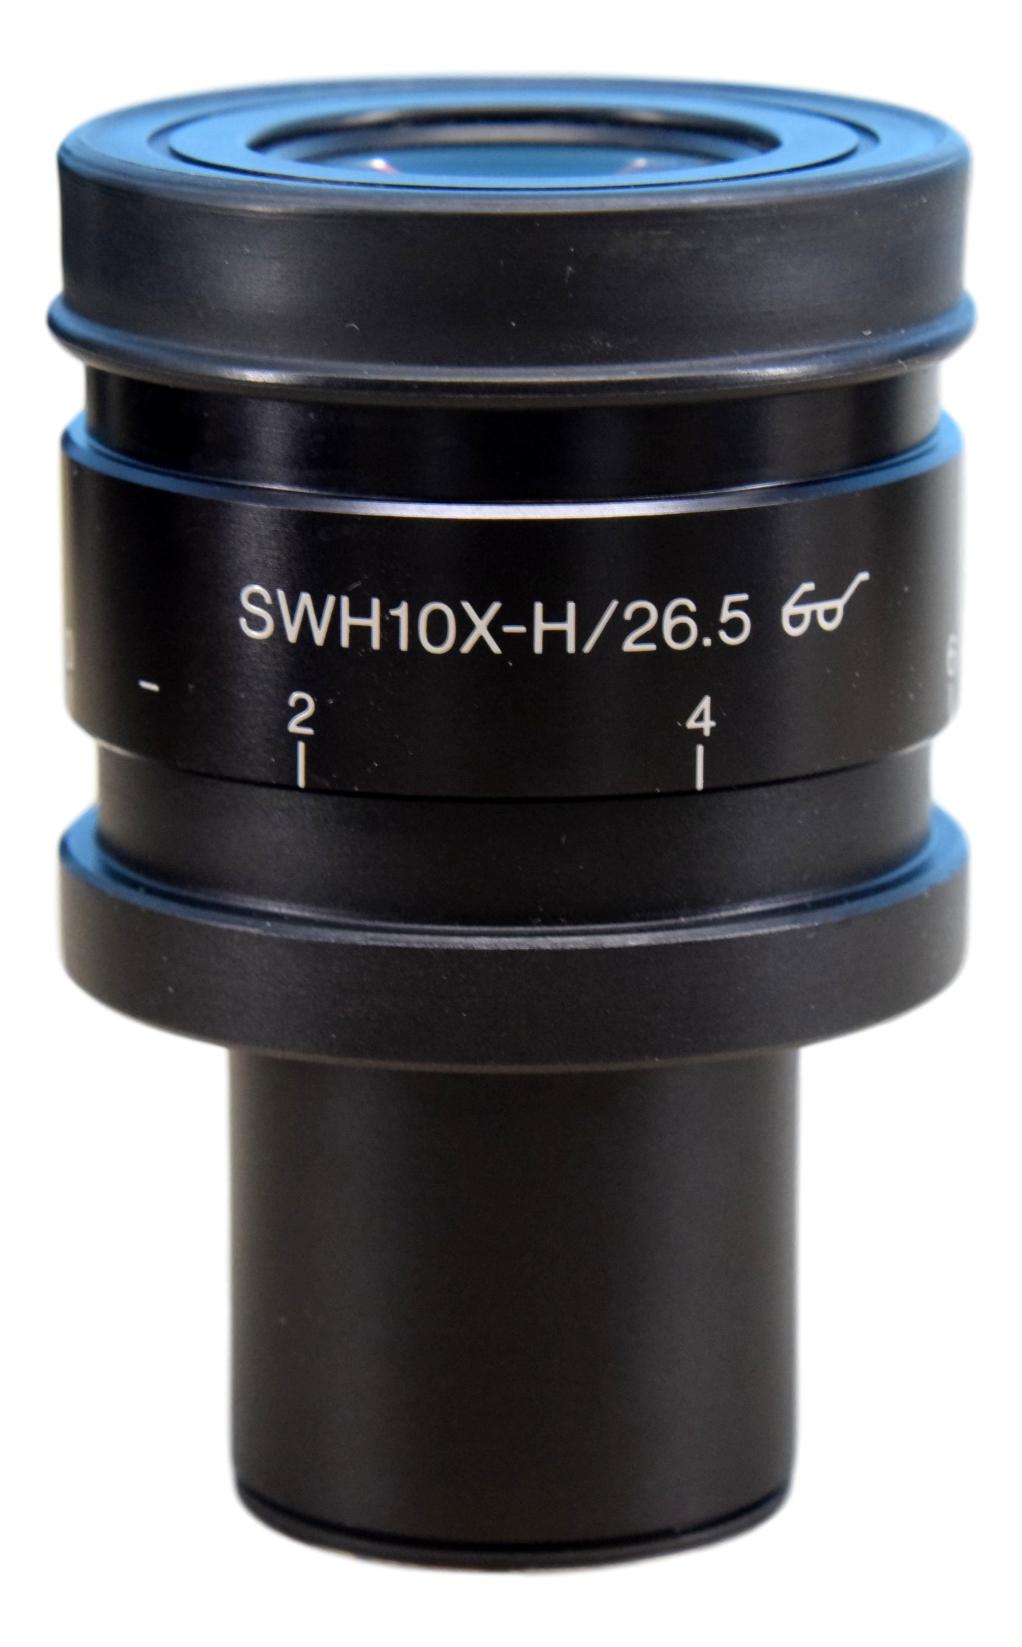 Olympus SWH10X-H / 26.5 Super Widefield Eyepieces